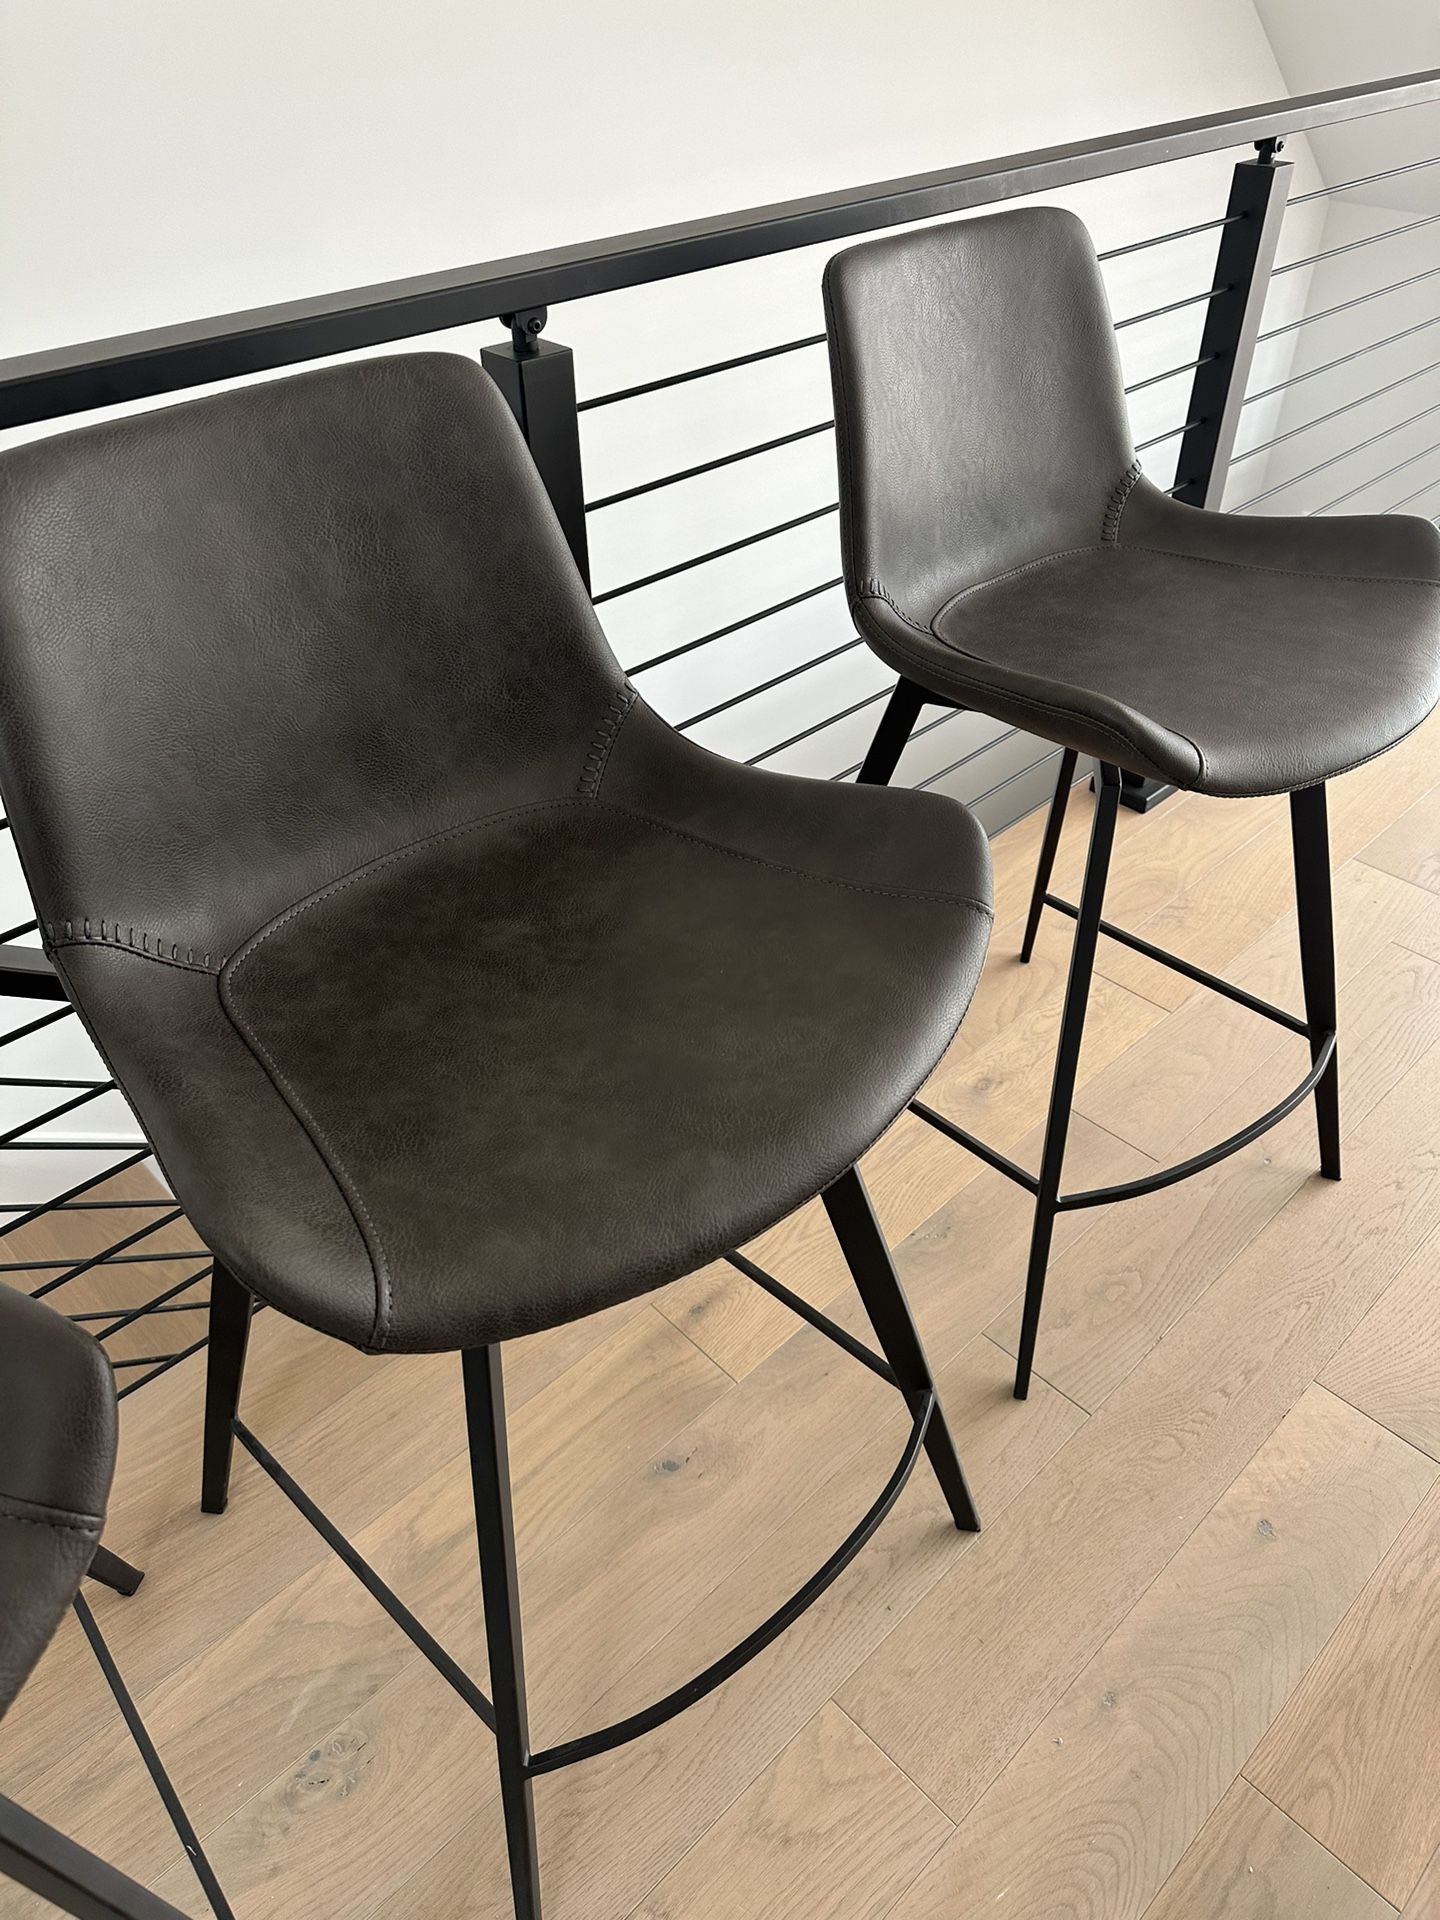 NEW 6 Leather Arhaus Stools - Counter height 